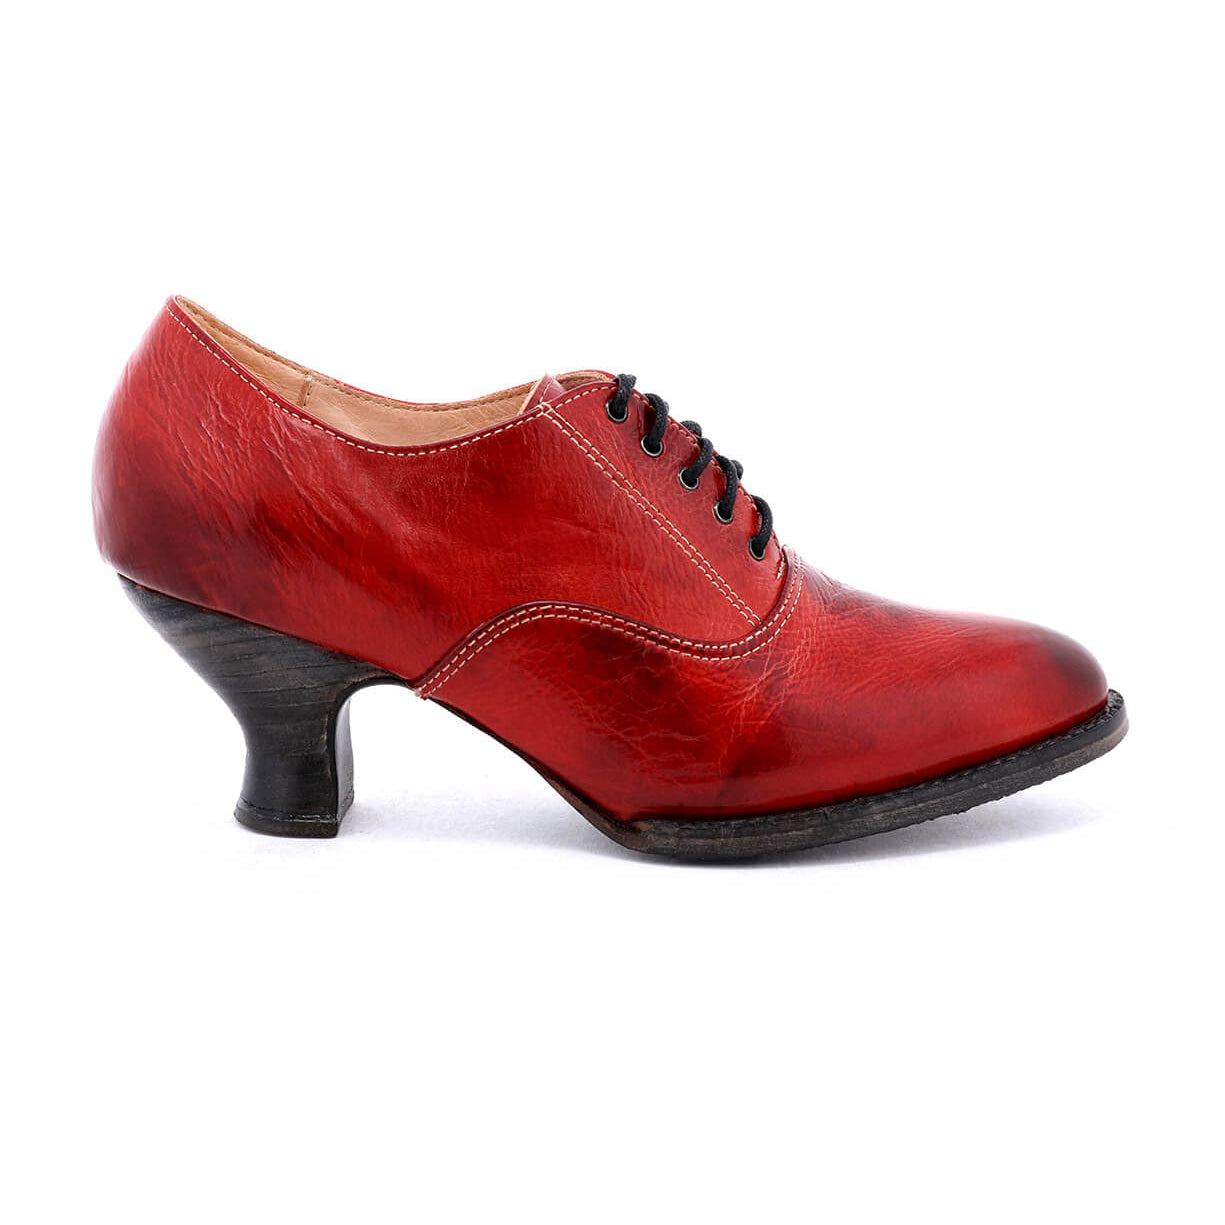 A women's red oxford shoe named Janet, made by Oak Tree Farms, with a lace up front on a white background.